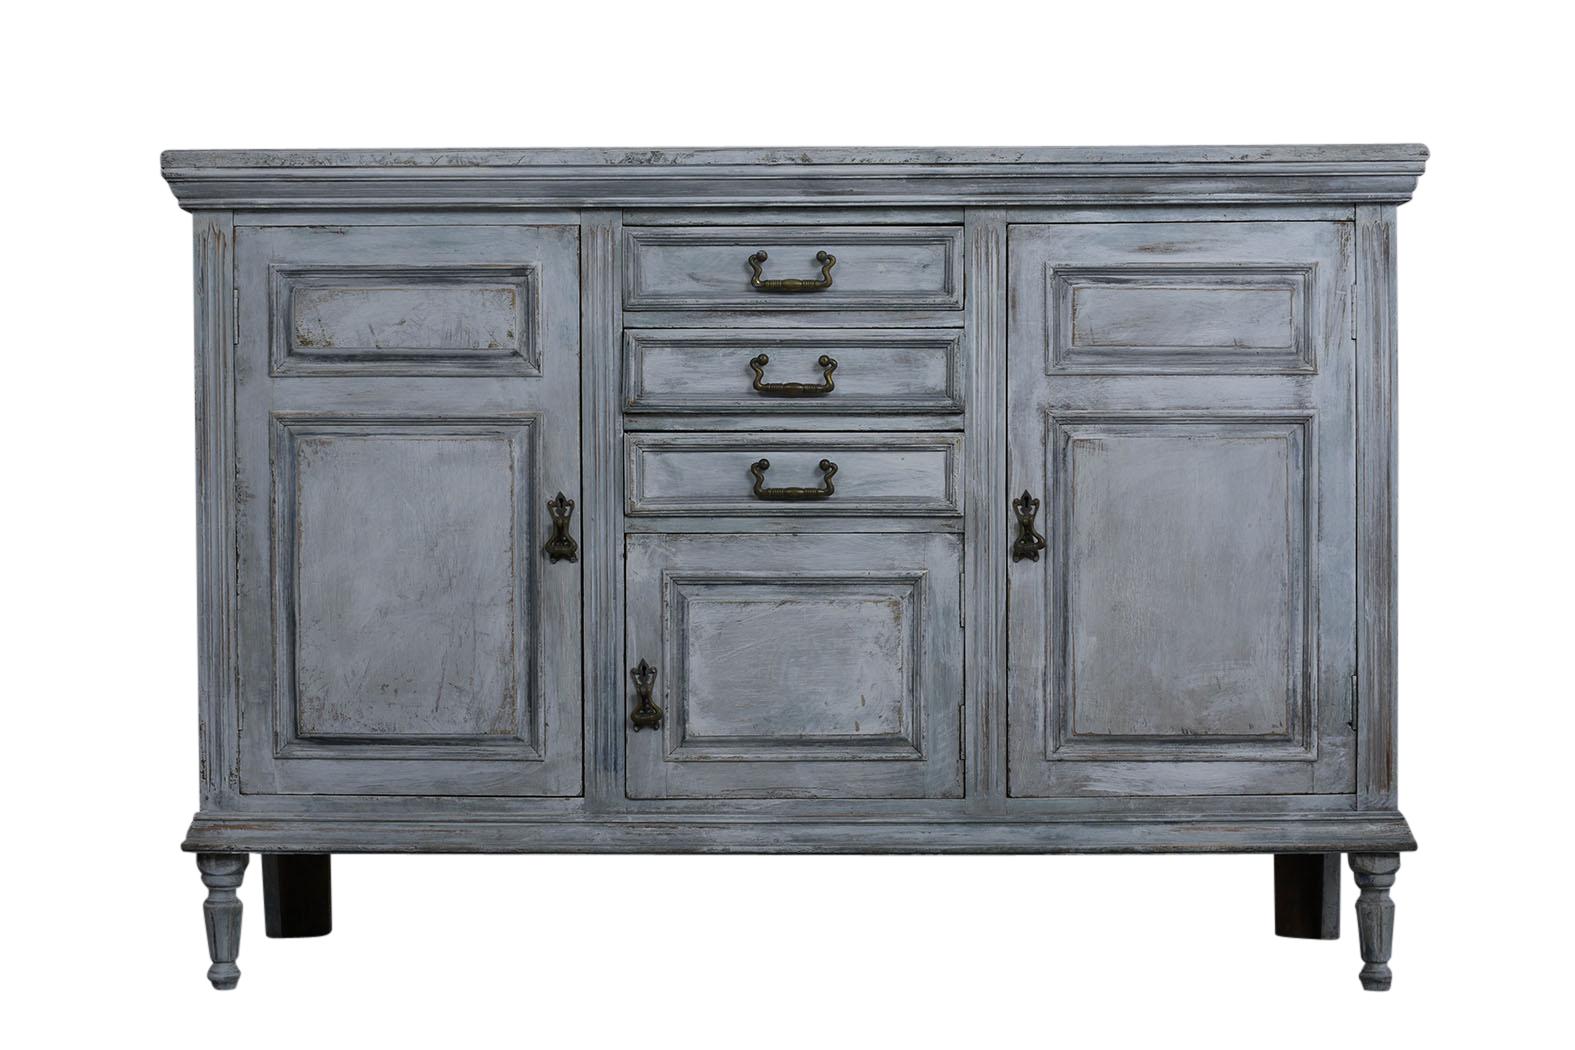 This 1900s Louis XVI-style Buffet is made from maple wood painted in a white and grey-blue color combination with a distressed finish. There are three center drawers with brass drawer handles, a small panel door with a compartment underneath, and